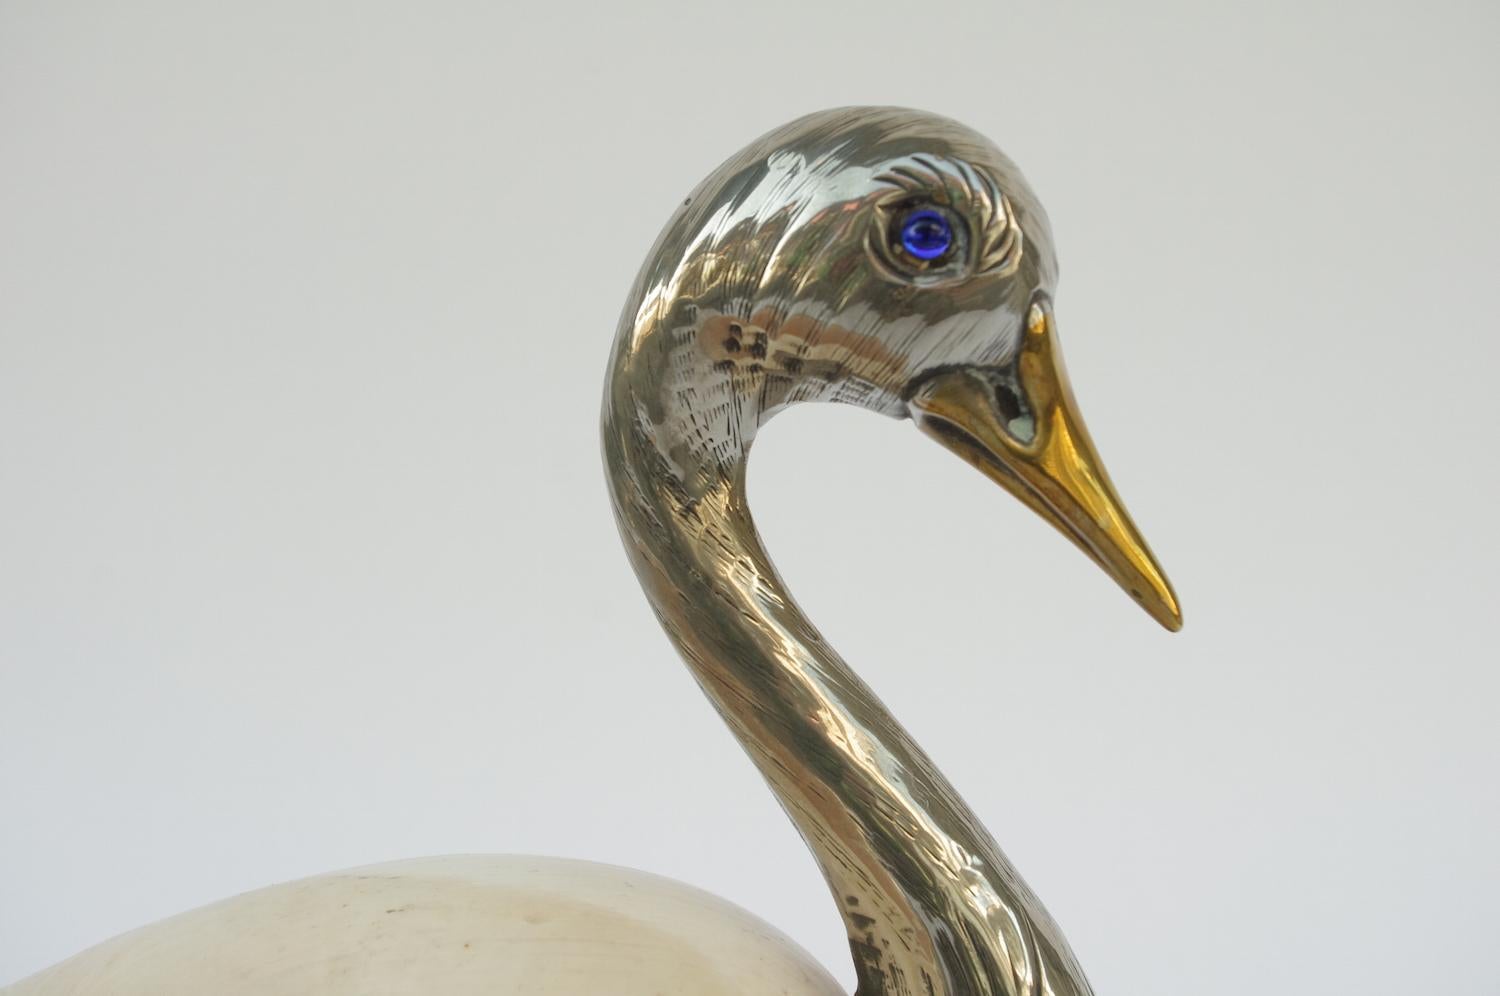 Natural shell and silvered metal swan trinket bowl.
Italian work signed Binazzi, made during the 1970s.